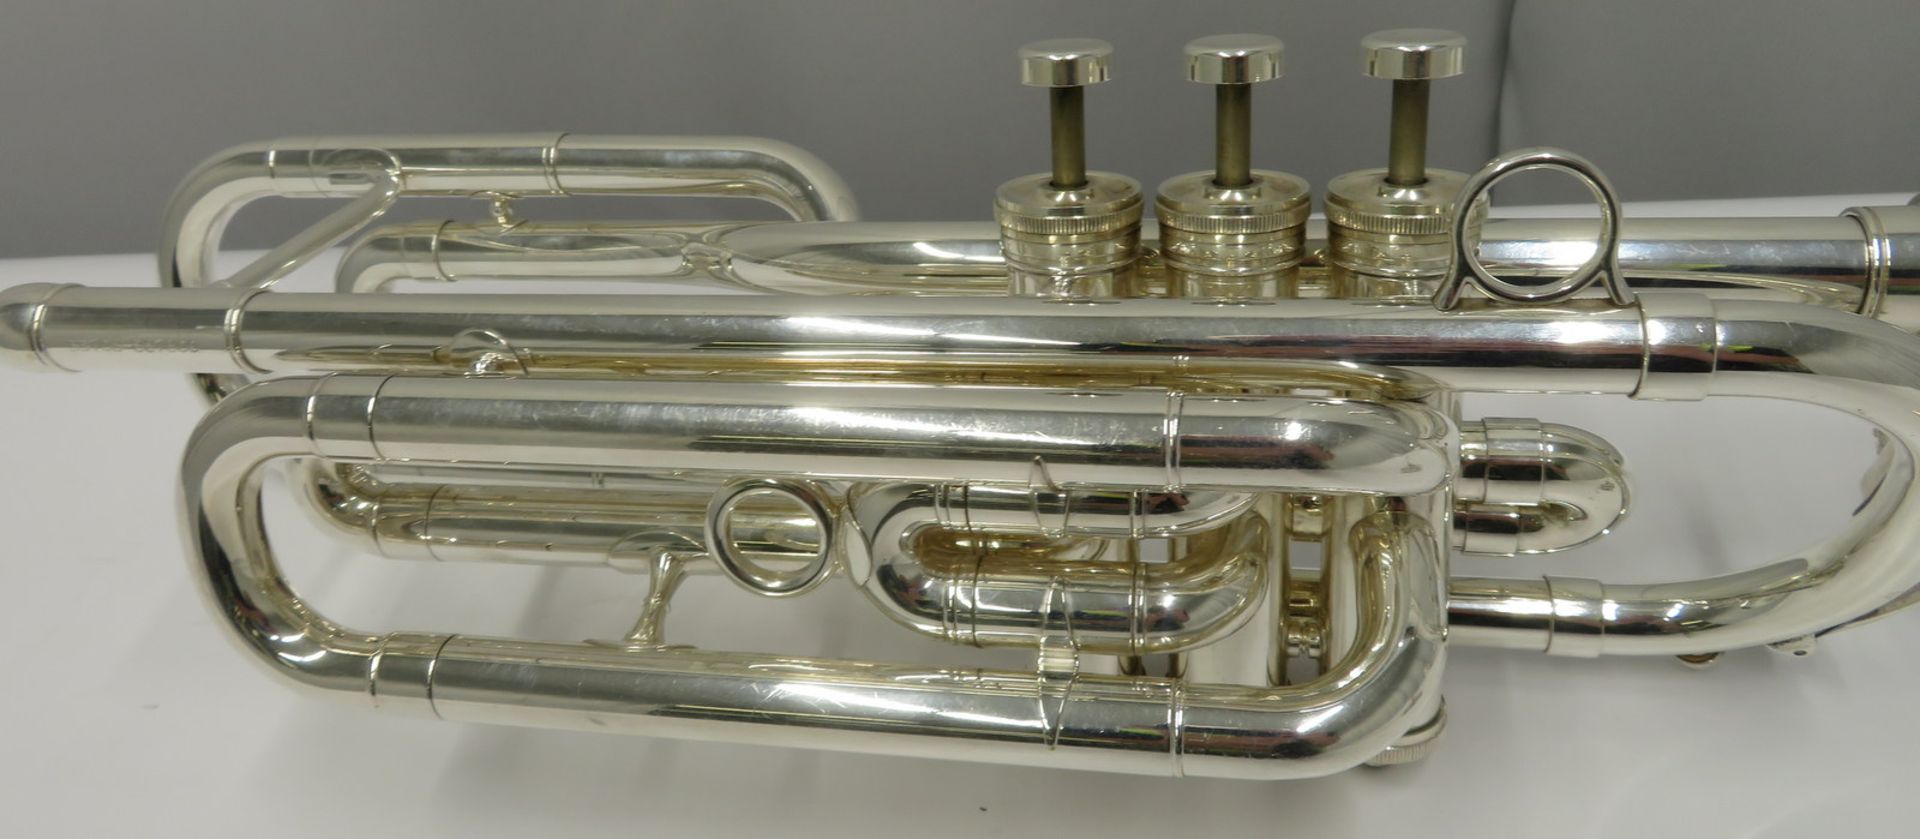 Besson International BE708 fanfare trumpet with case. Serial number: 887800. - Image 5 of 14